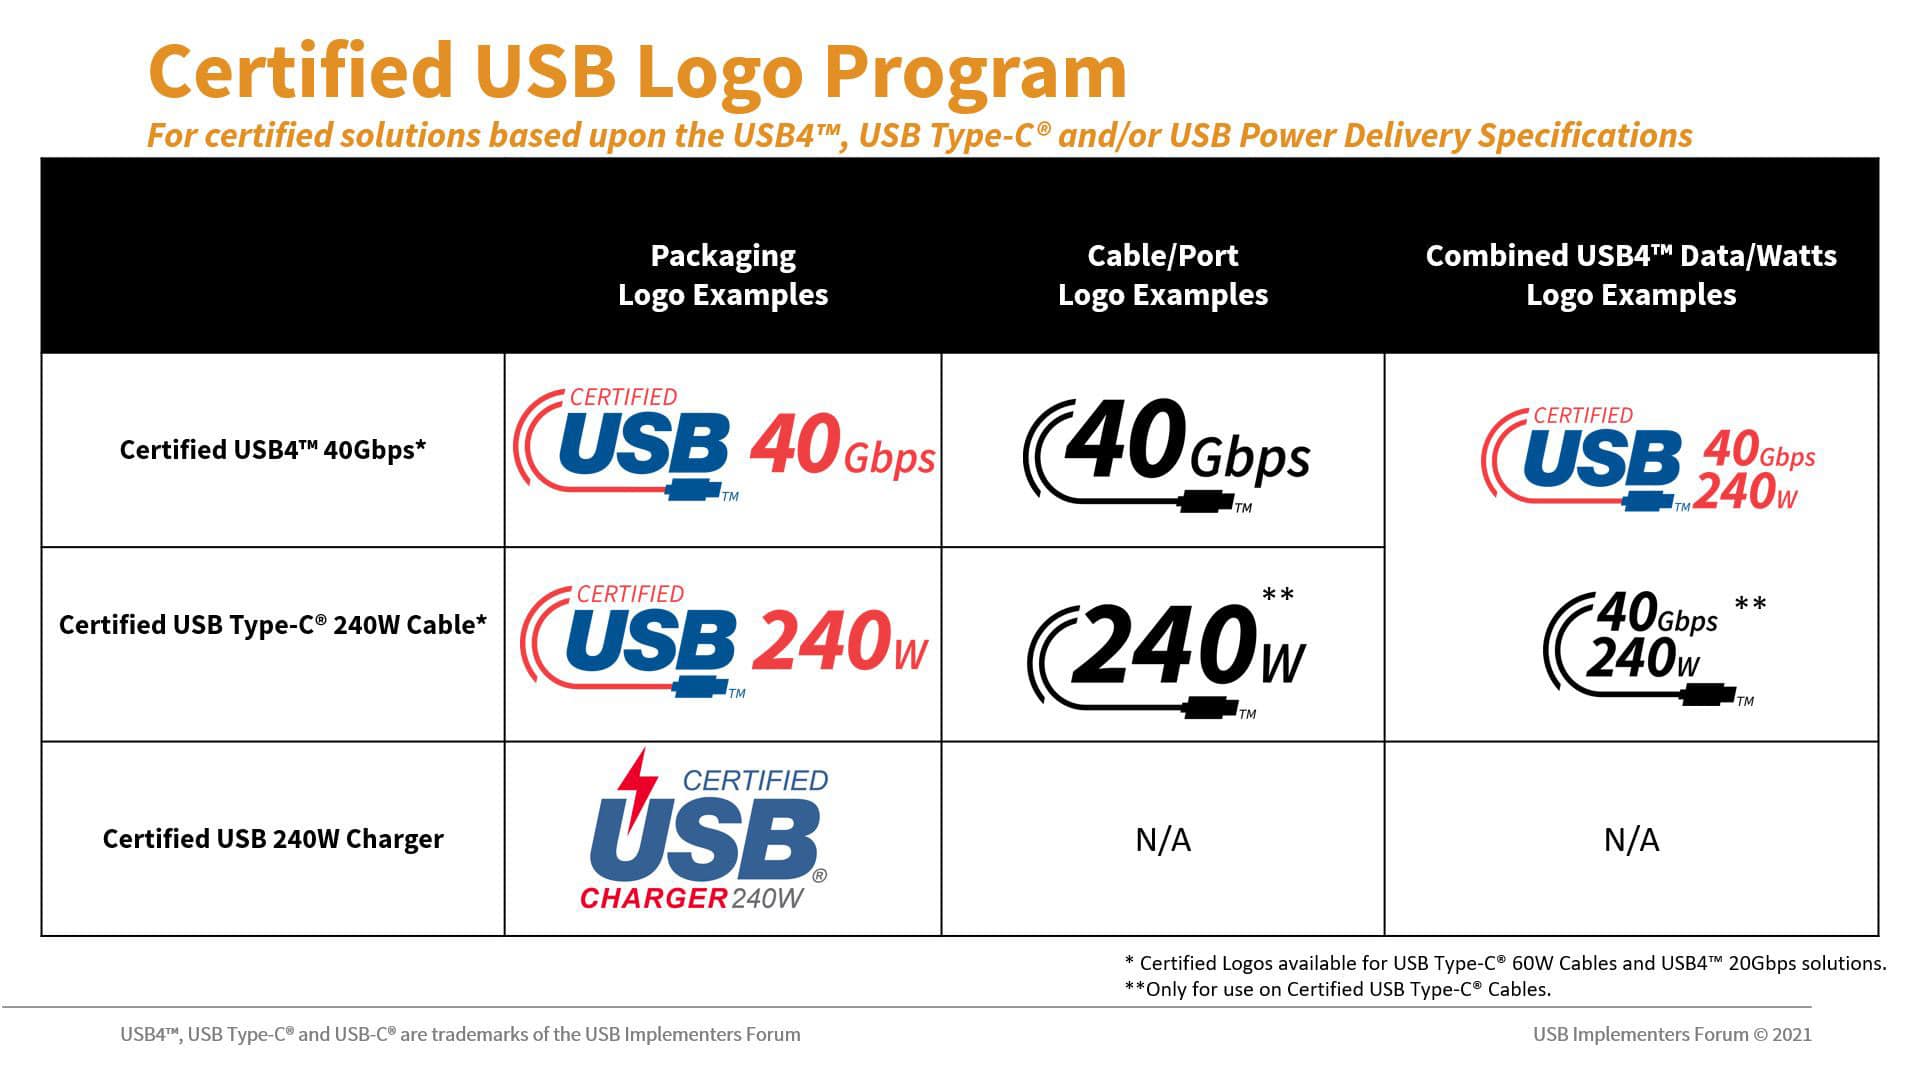 USB Implementers Forum announce new USB Type-C cable power rating logos for up to 240W charging